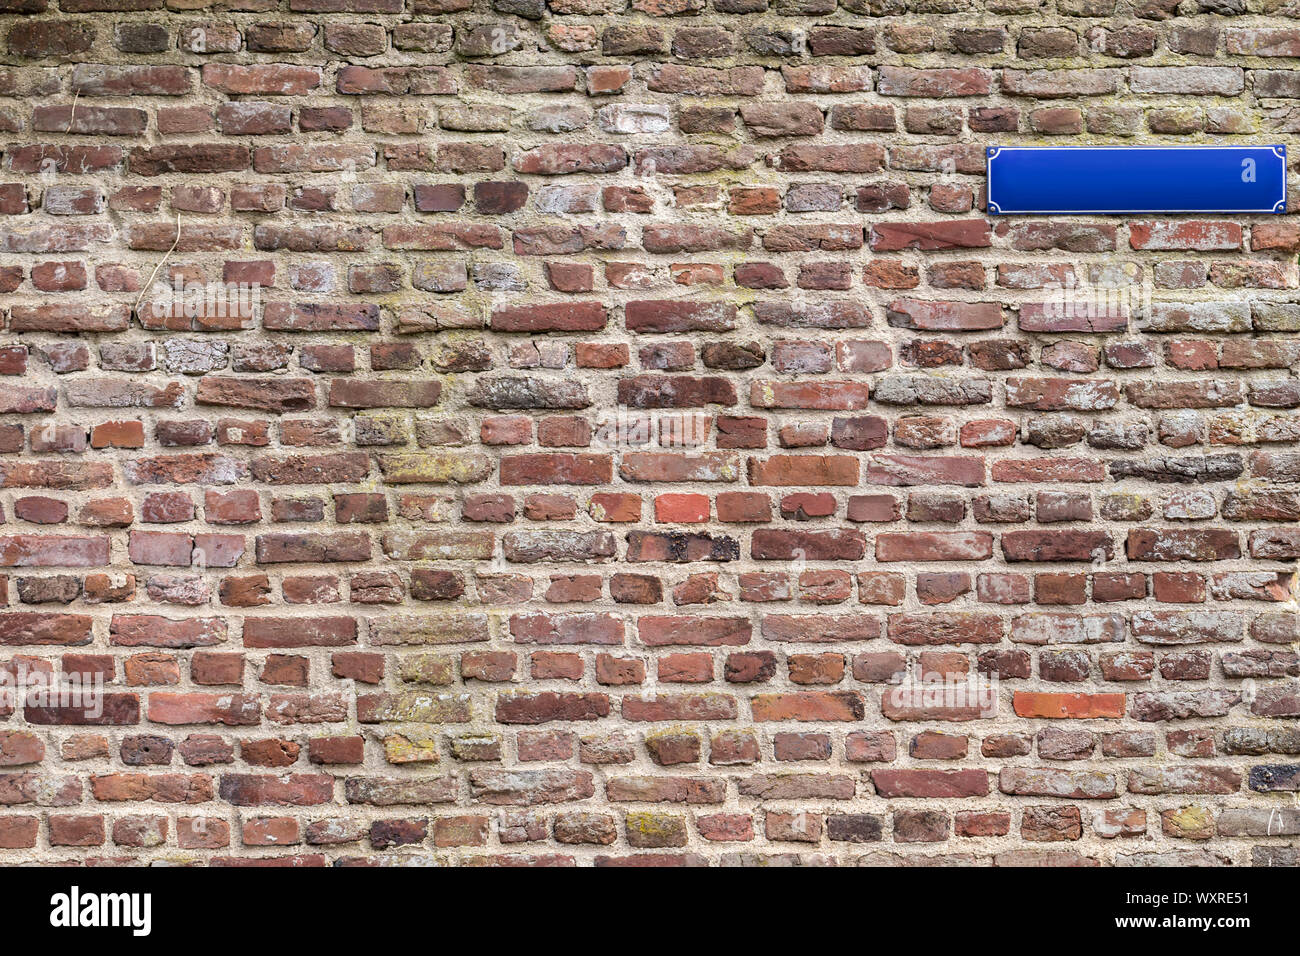 Old brick walling background/template with empty street sign for own type. Brick wall without street sign is also available. Stock Photo